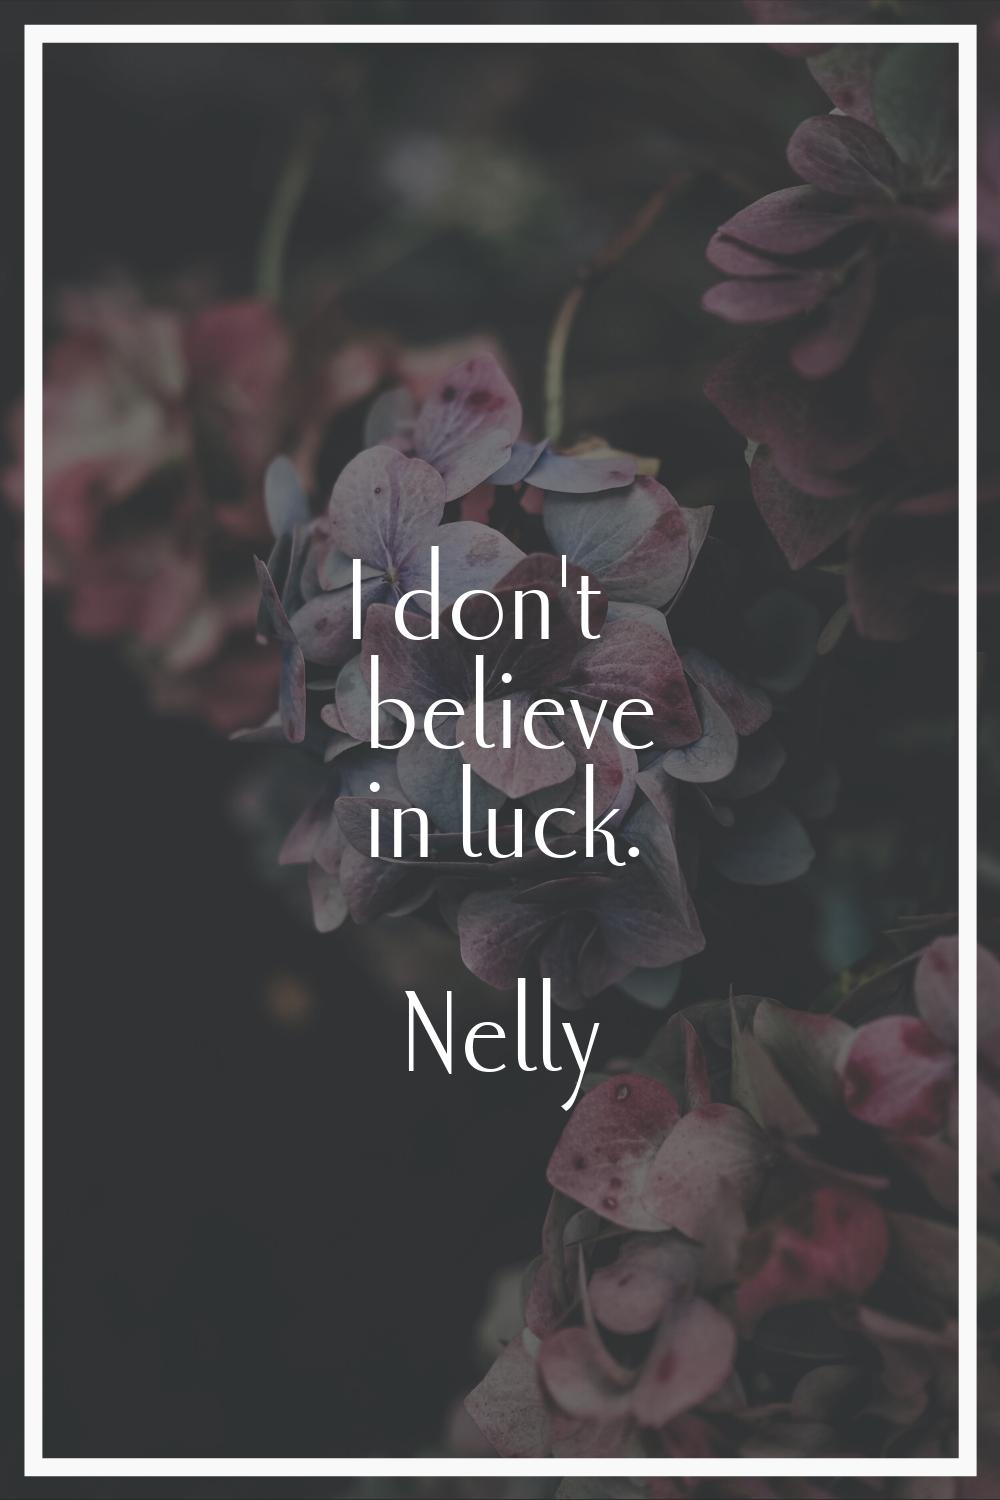 I don't believe in luck.